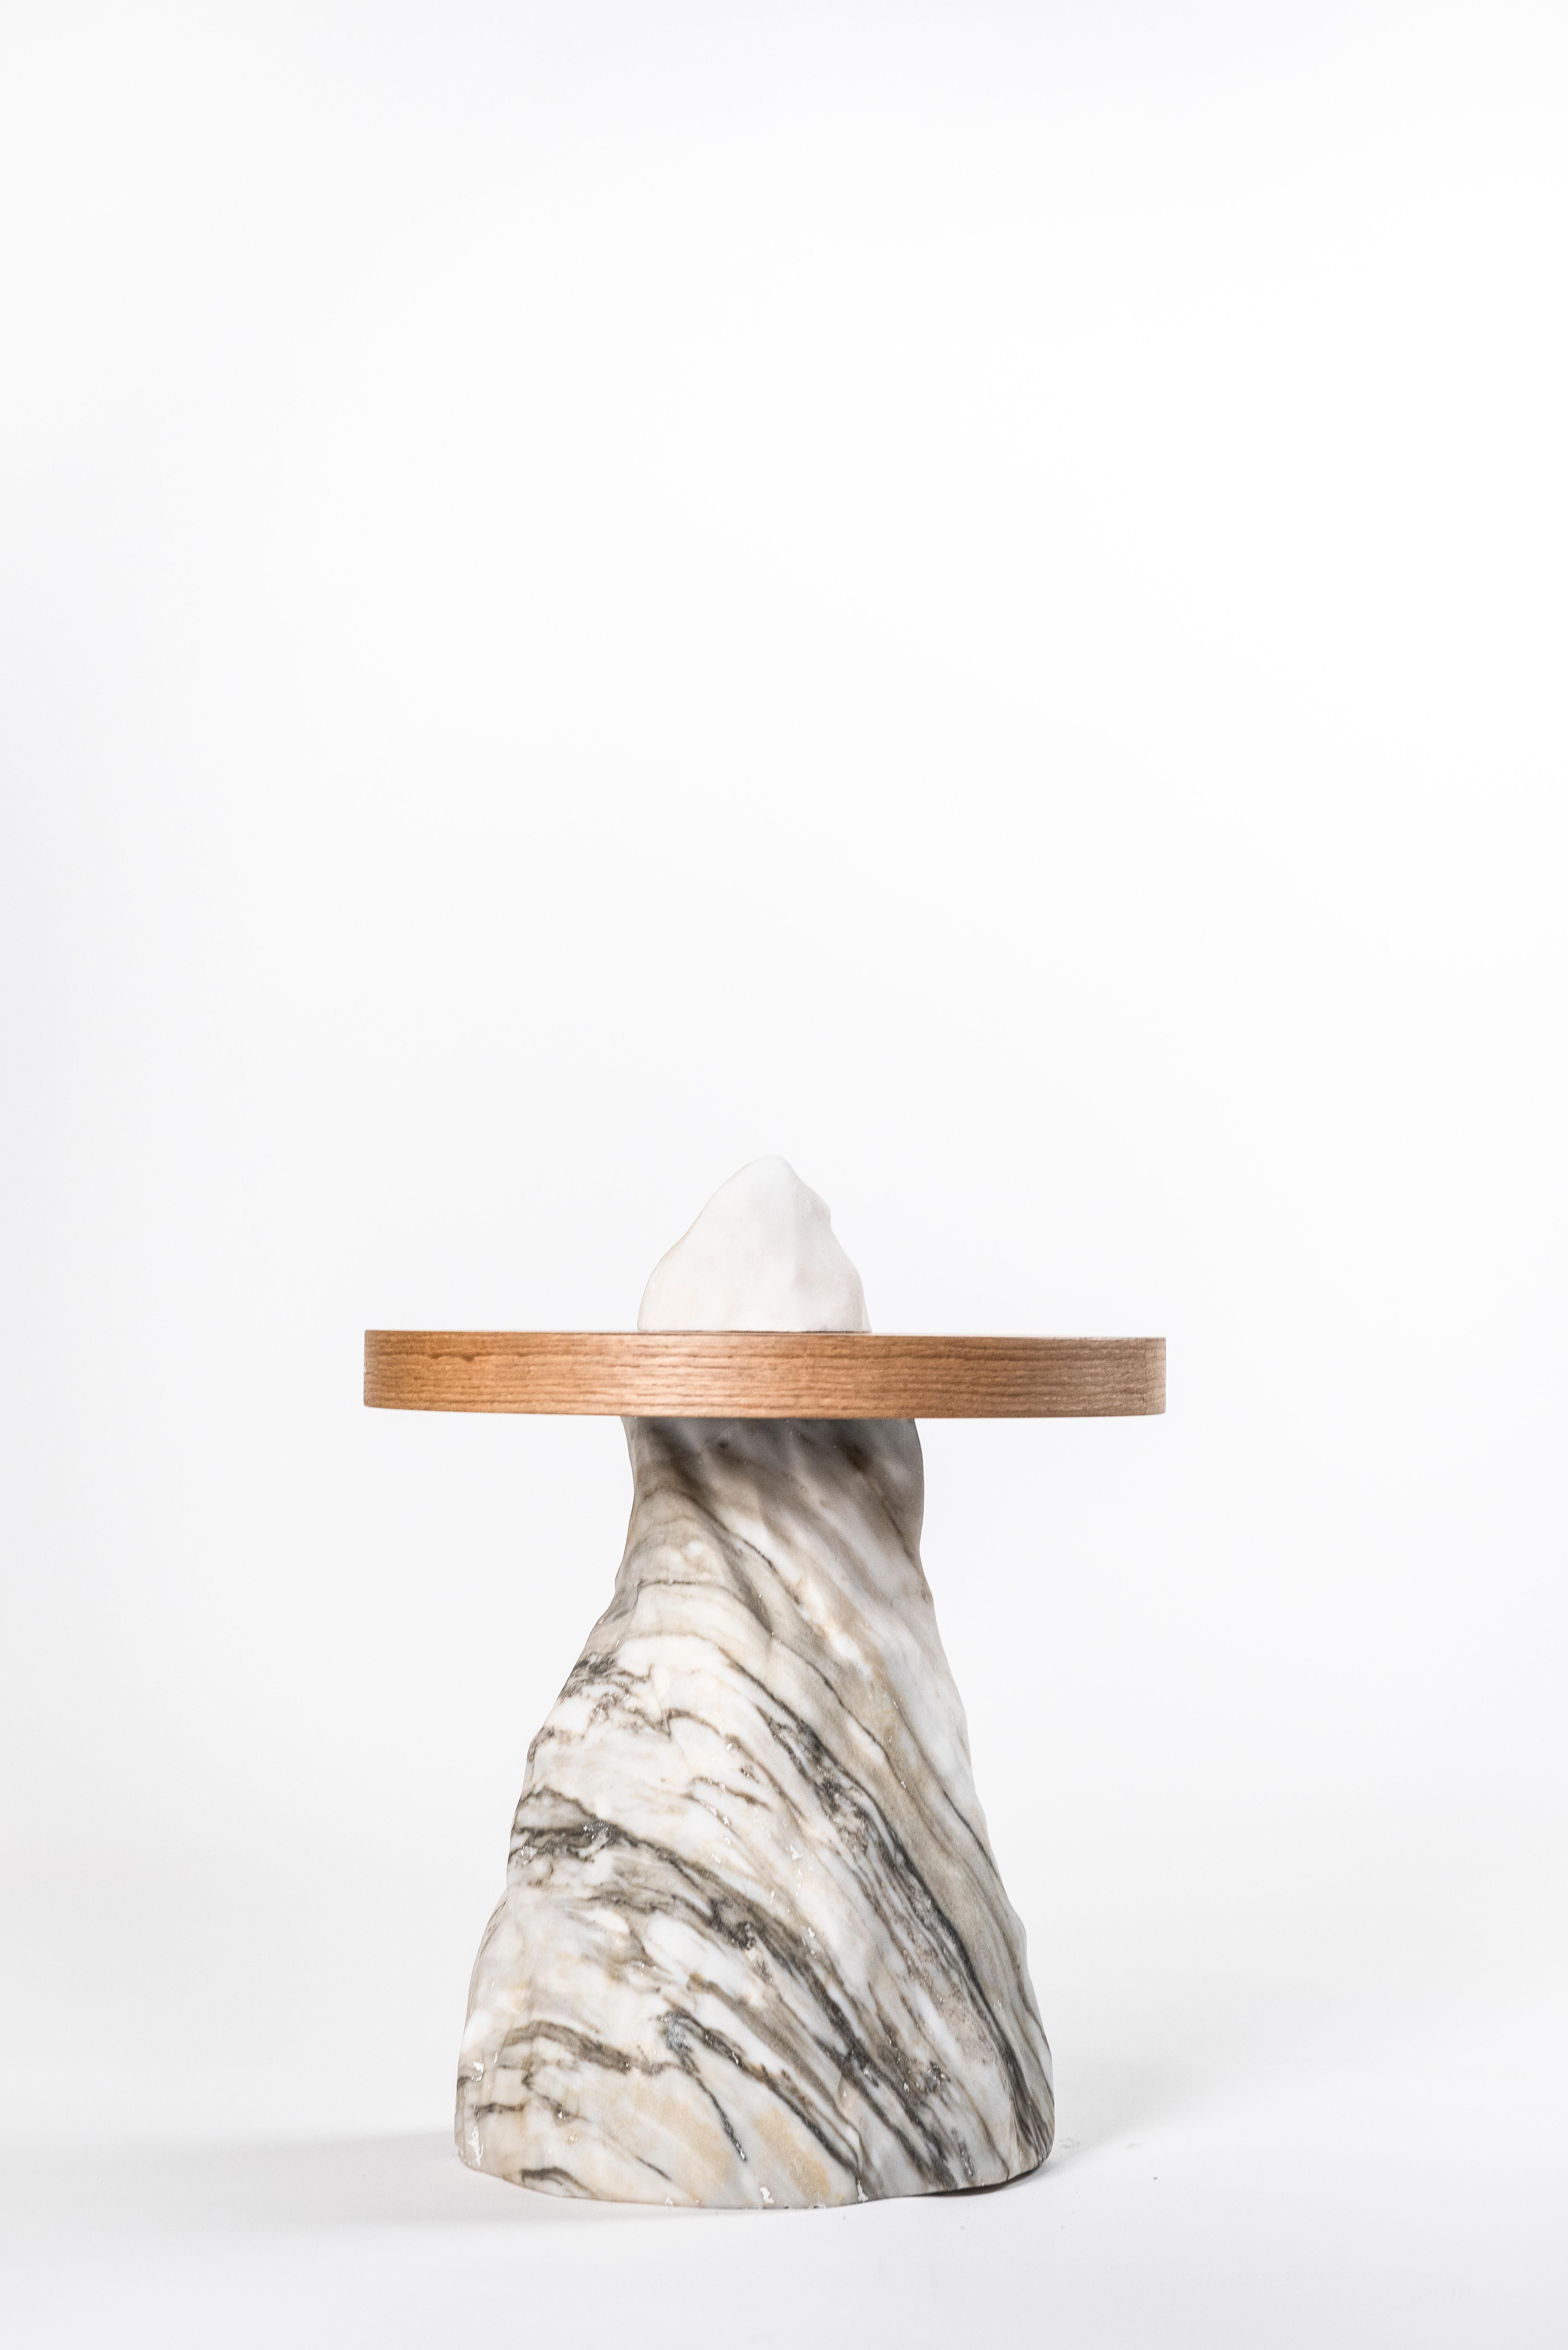 Beloco Baby 2 Side Table by Bea Interiors
One of a Kind.
Dimensions: Ø 61 x H 81.28 cm.
Materials: Solid white oak and marble.

The Beloco Baby 1 is a versatile furniture piece that can be used both as a side table or a coffee table when paired with